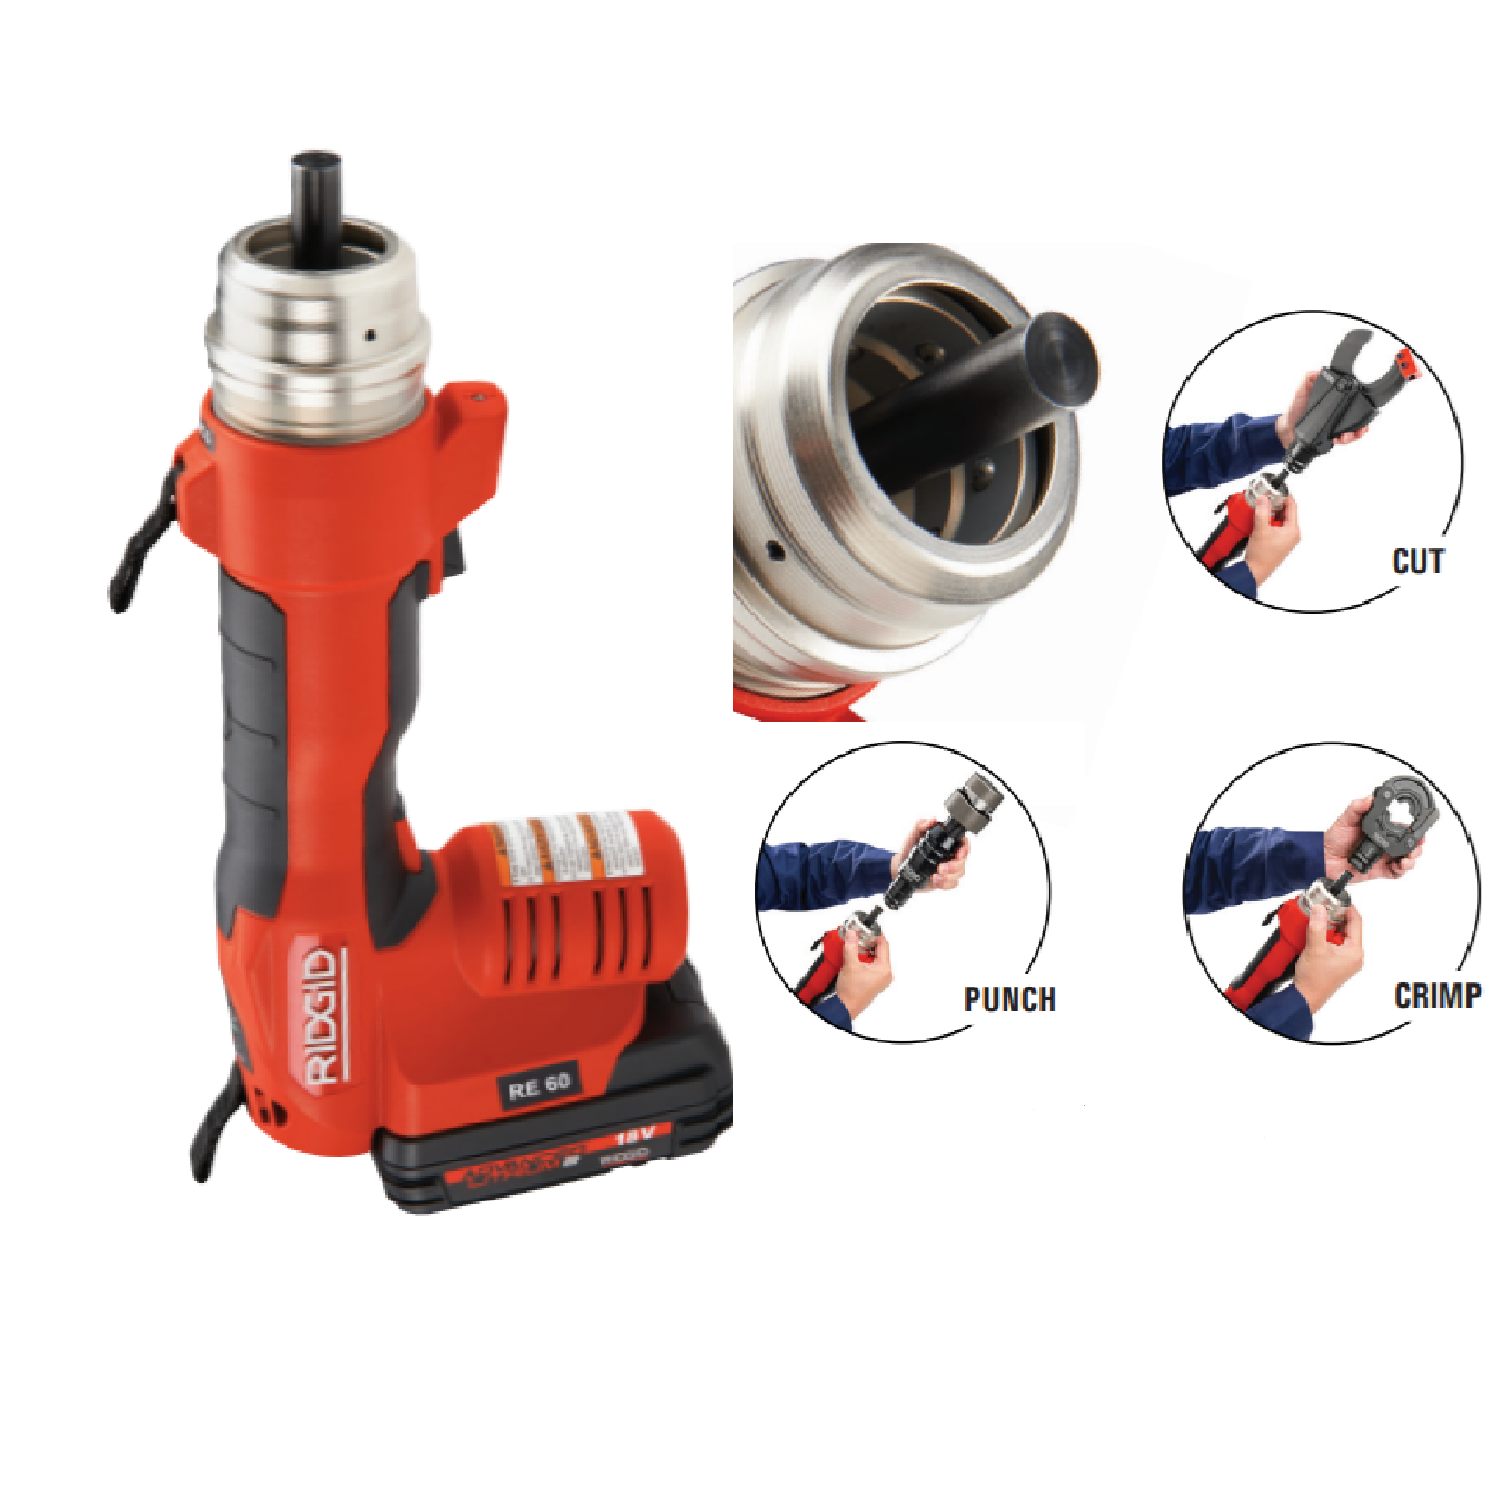 Ridgid RE60 2 X 18V 2.0AH LI-ION Electrical Tool With CUT, CRIMP & PUNCH Quick-Change System